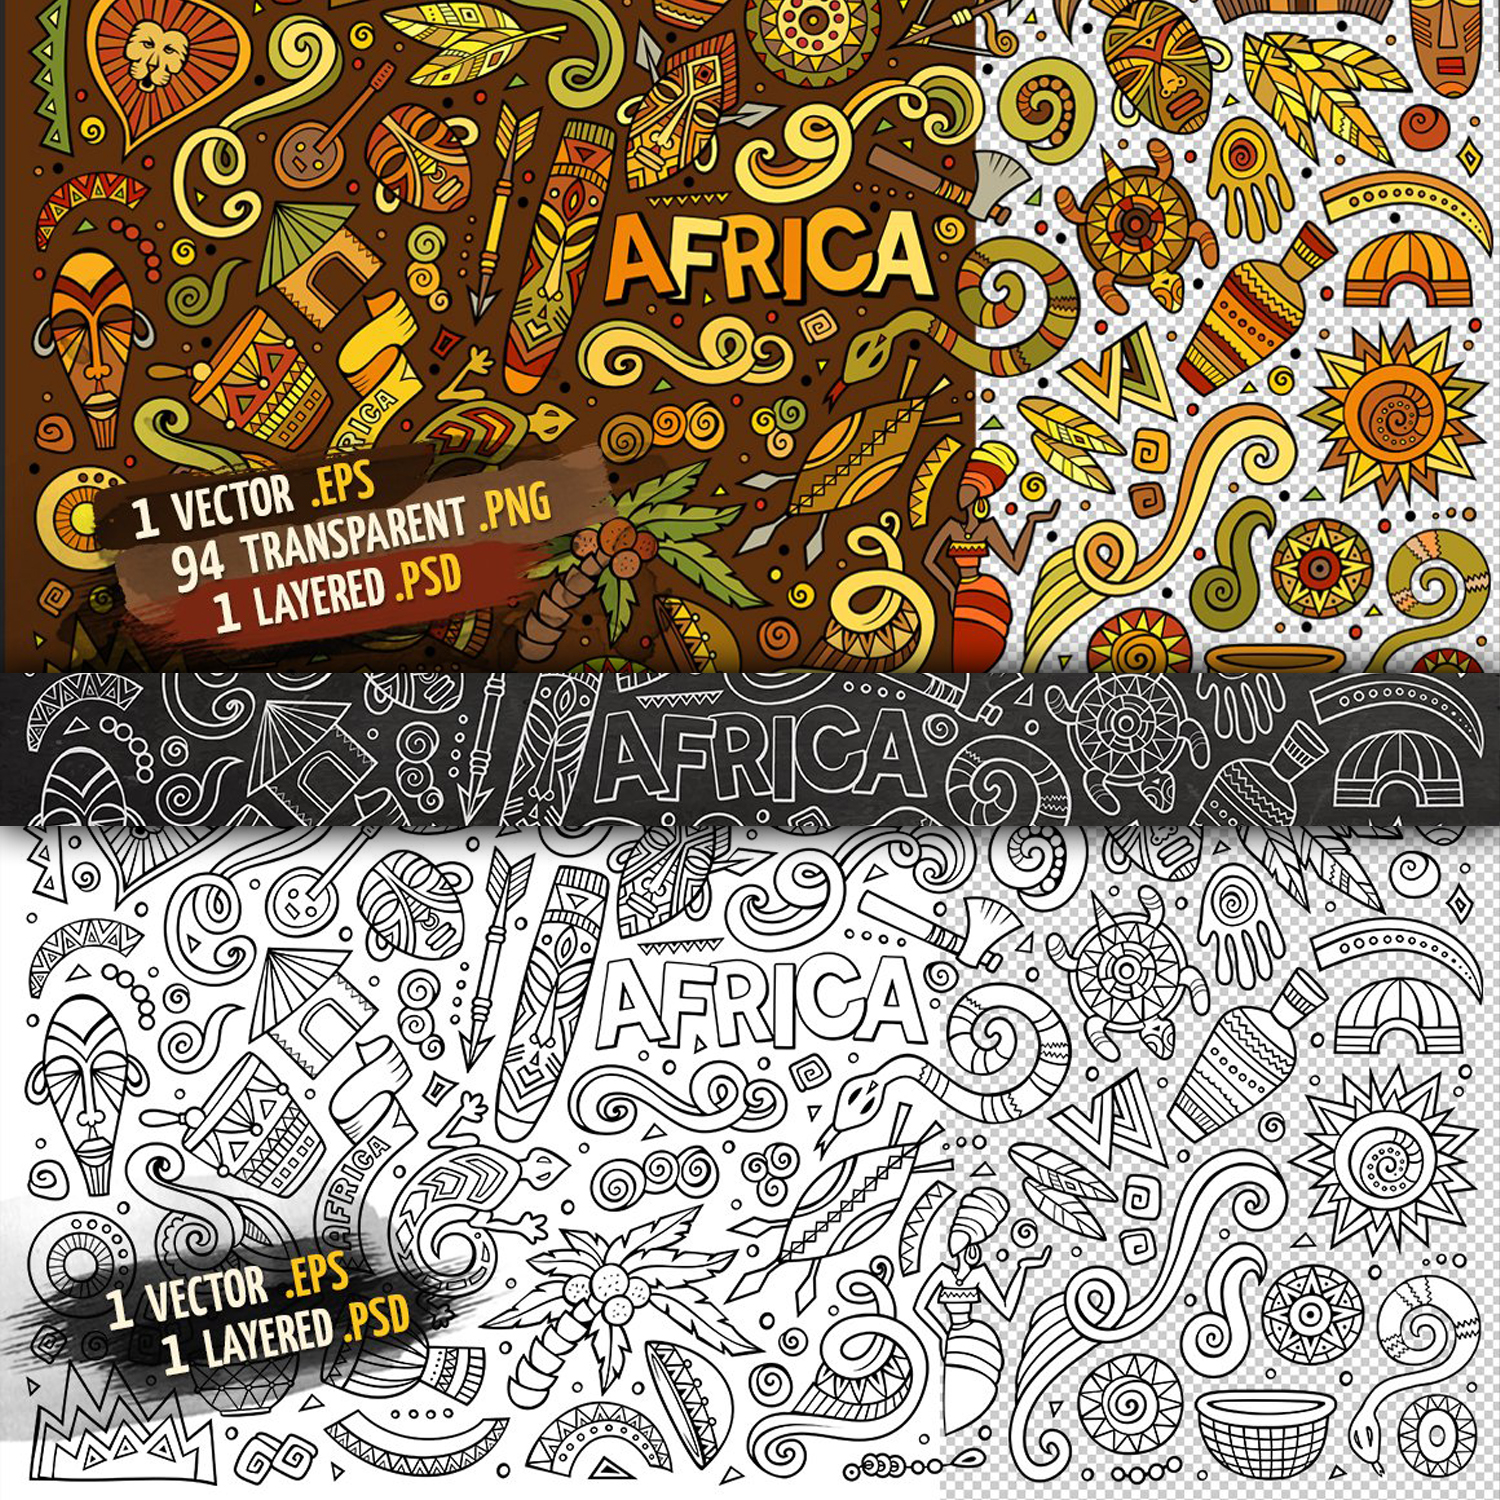 Stylization of goods and attributes of Africa.